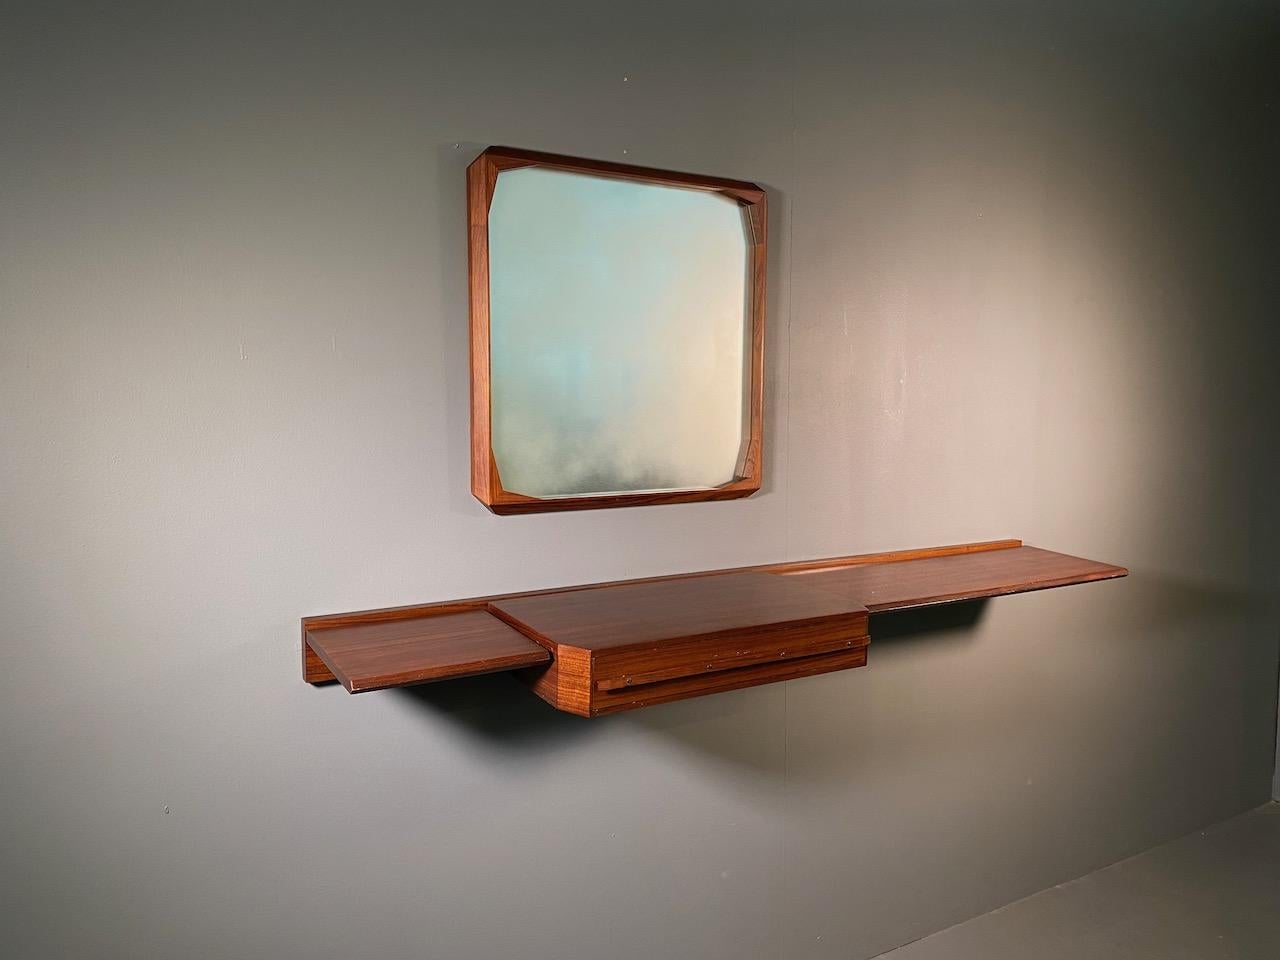 20th Century Wall Console and Mirror by Tredici of Pavia i 1950s, Designed by Dino Cavalli